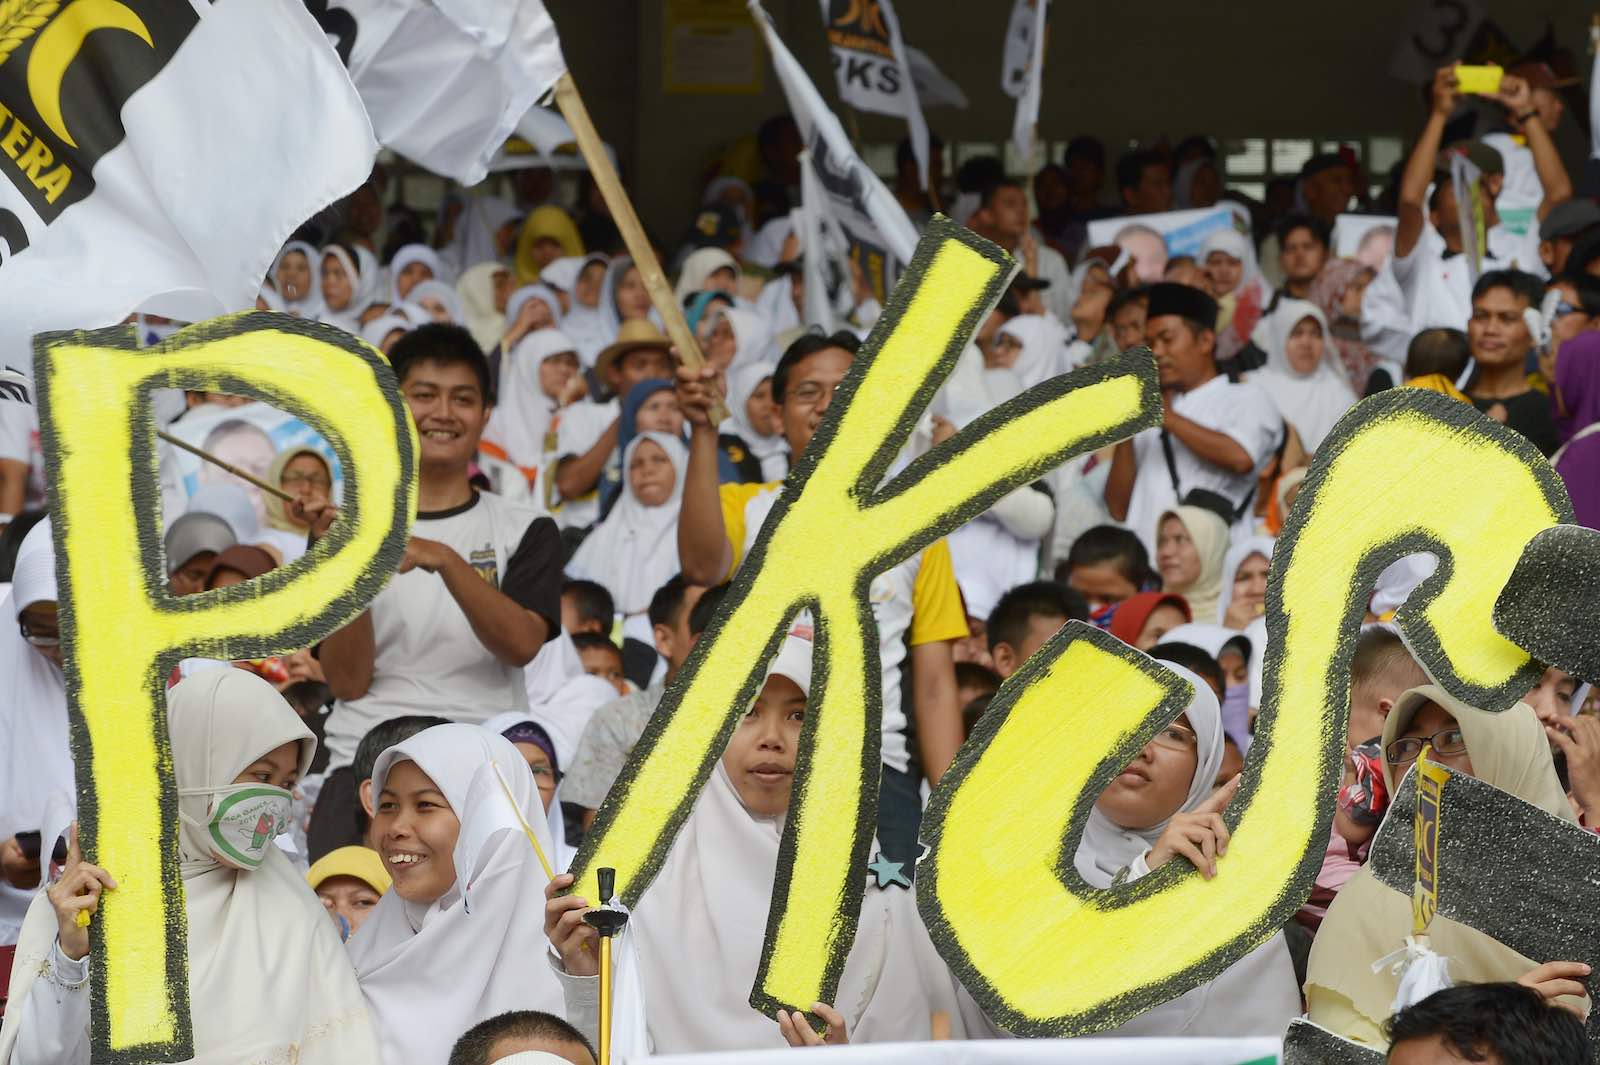 A rally for supporters of the Justice and Welfare Party (PKS) in Indonesia at Bung Karno stadium Jakarta, 2014 (Adek Berry/AFP/Getty Images)